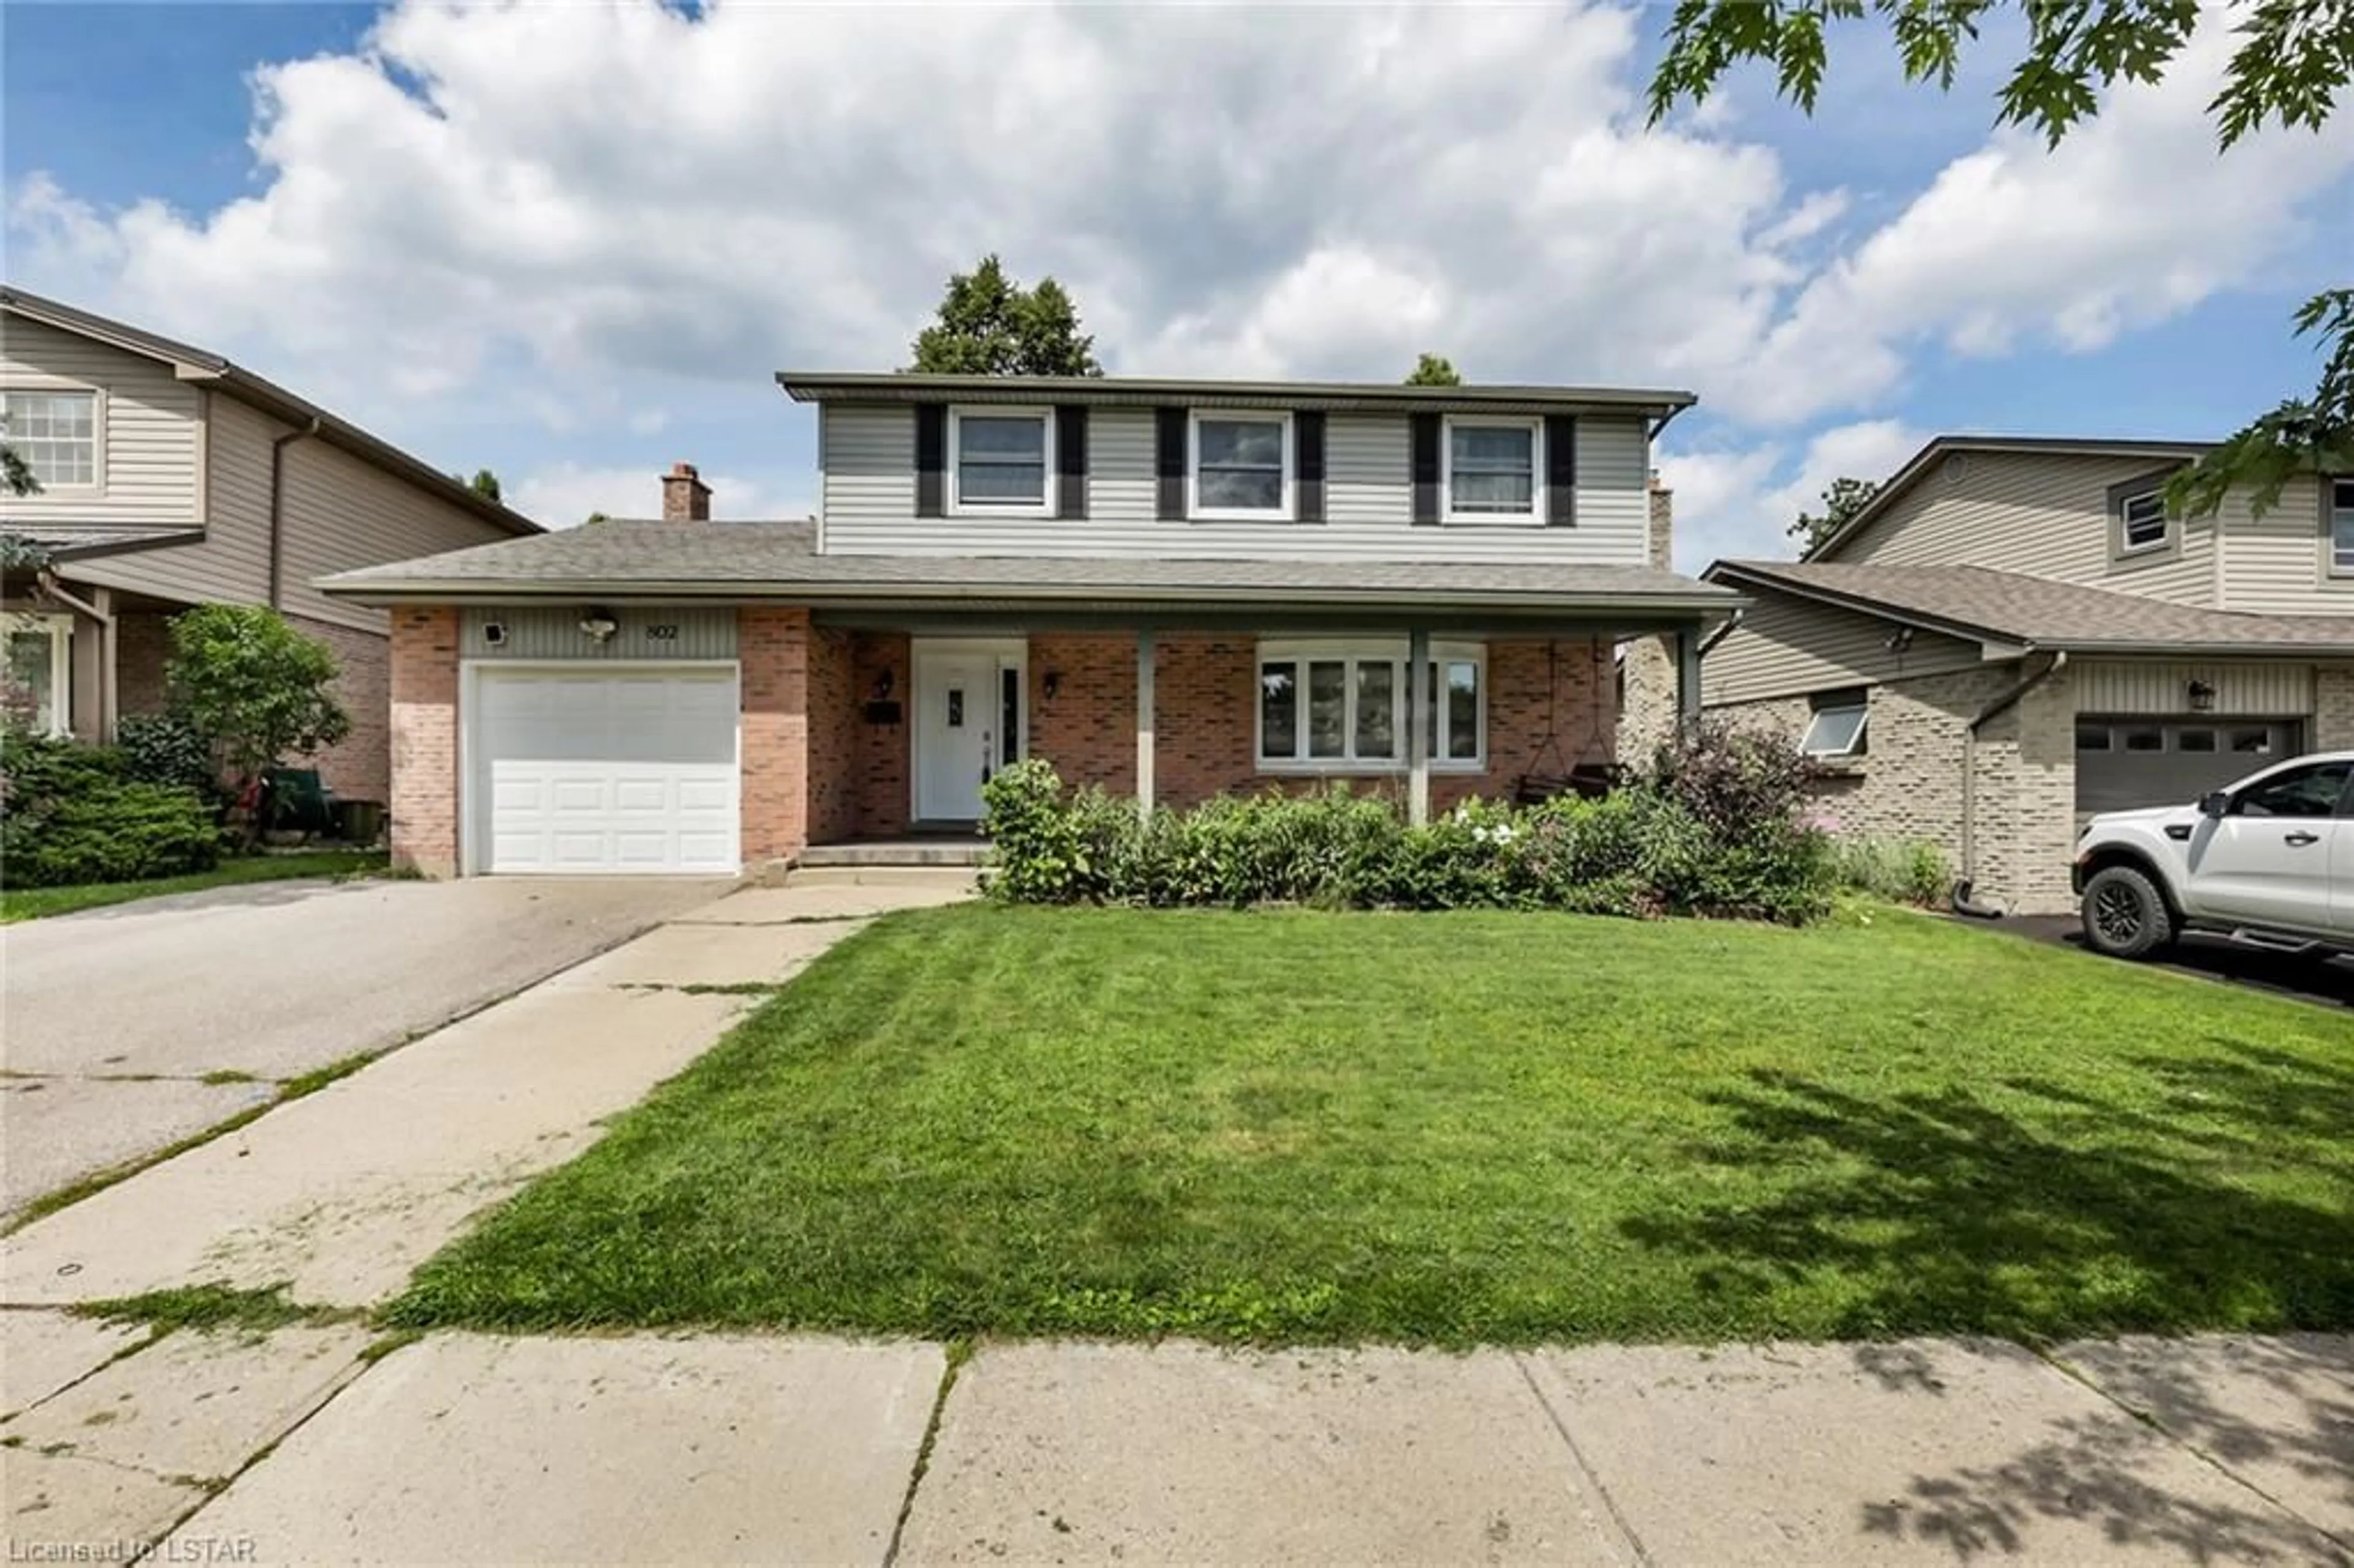 Frontside or backside of a home for 802 Viscount Rd, London Ontario N6J 4A2